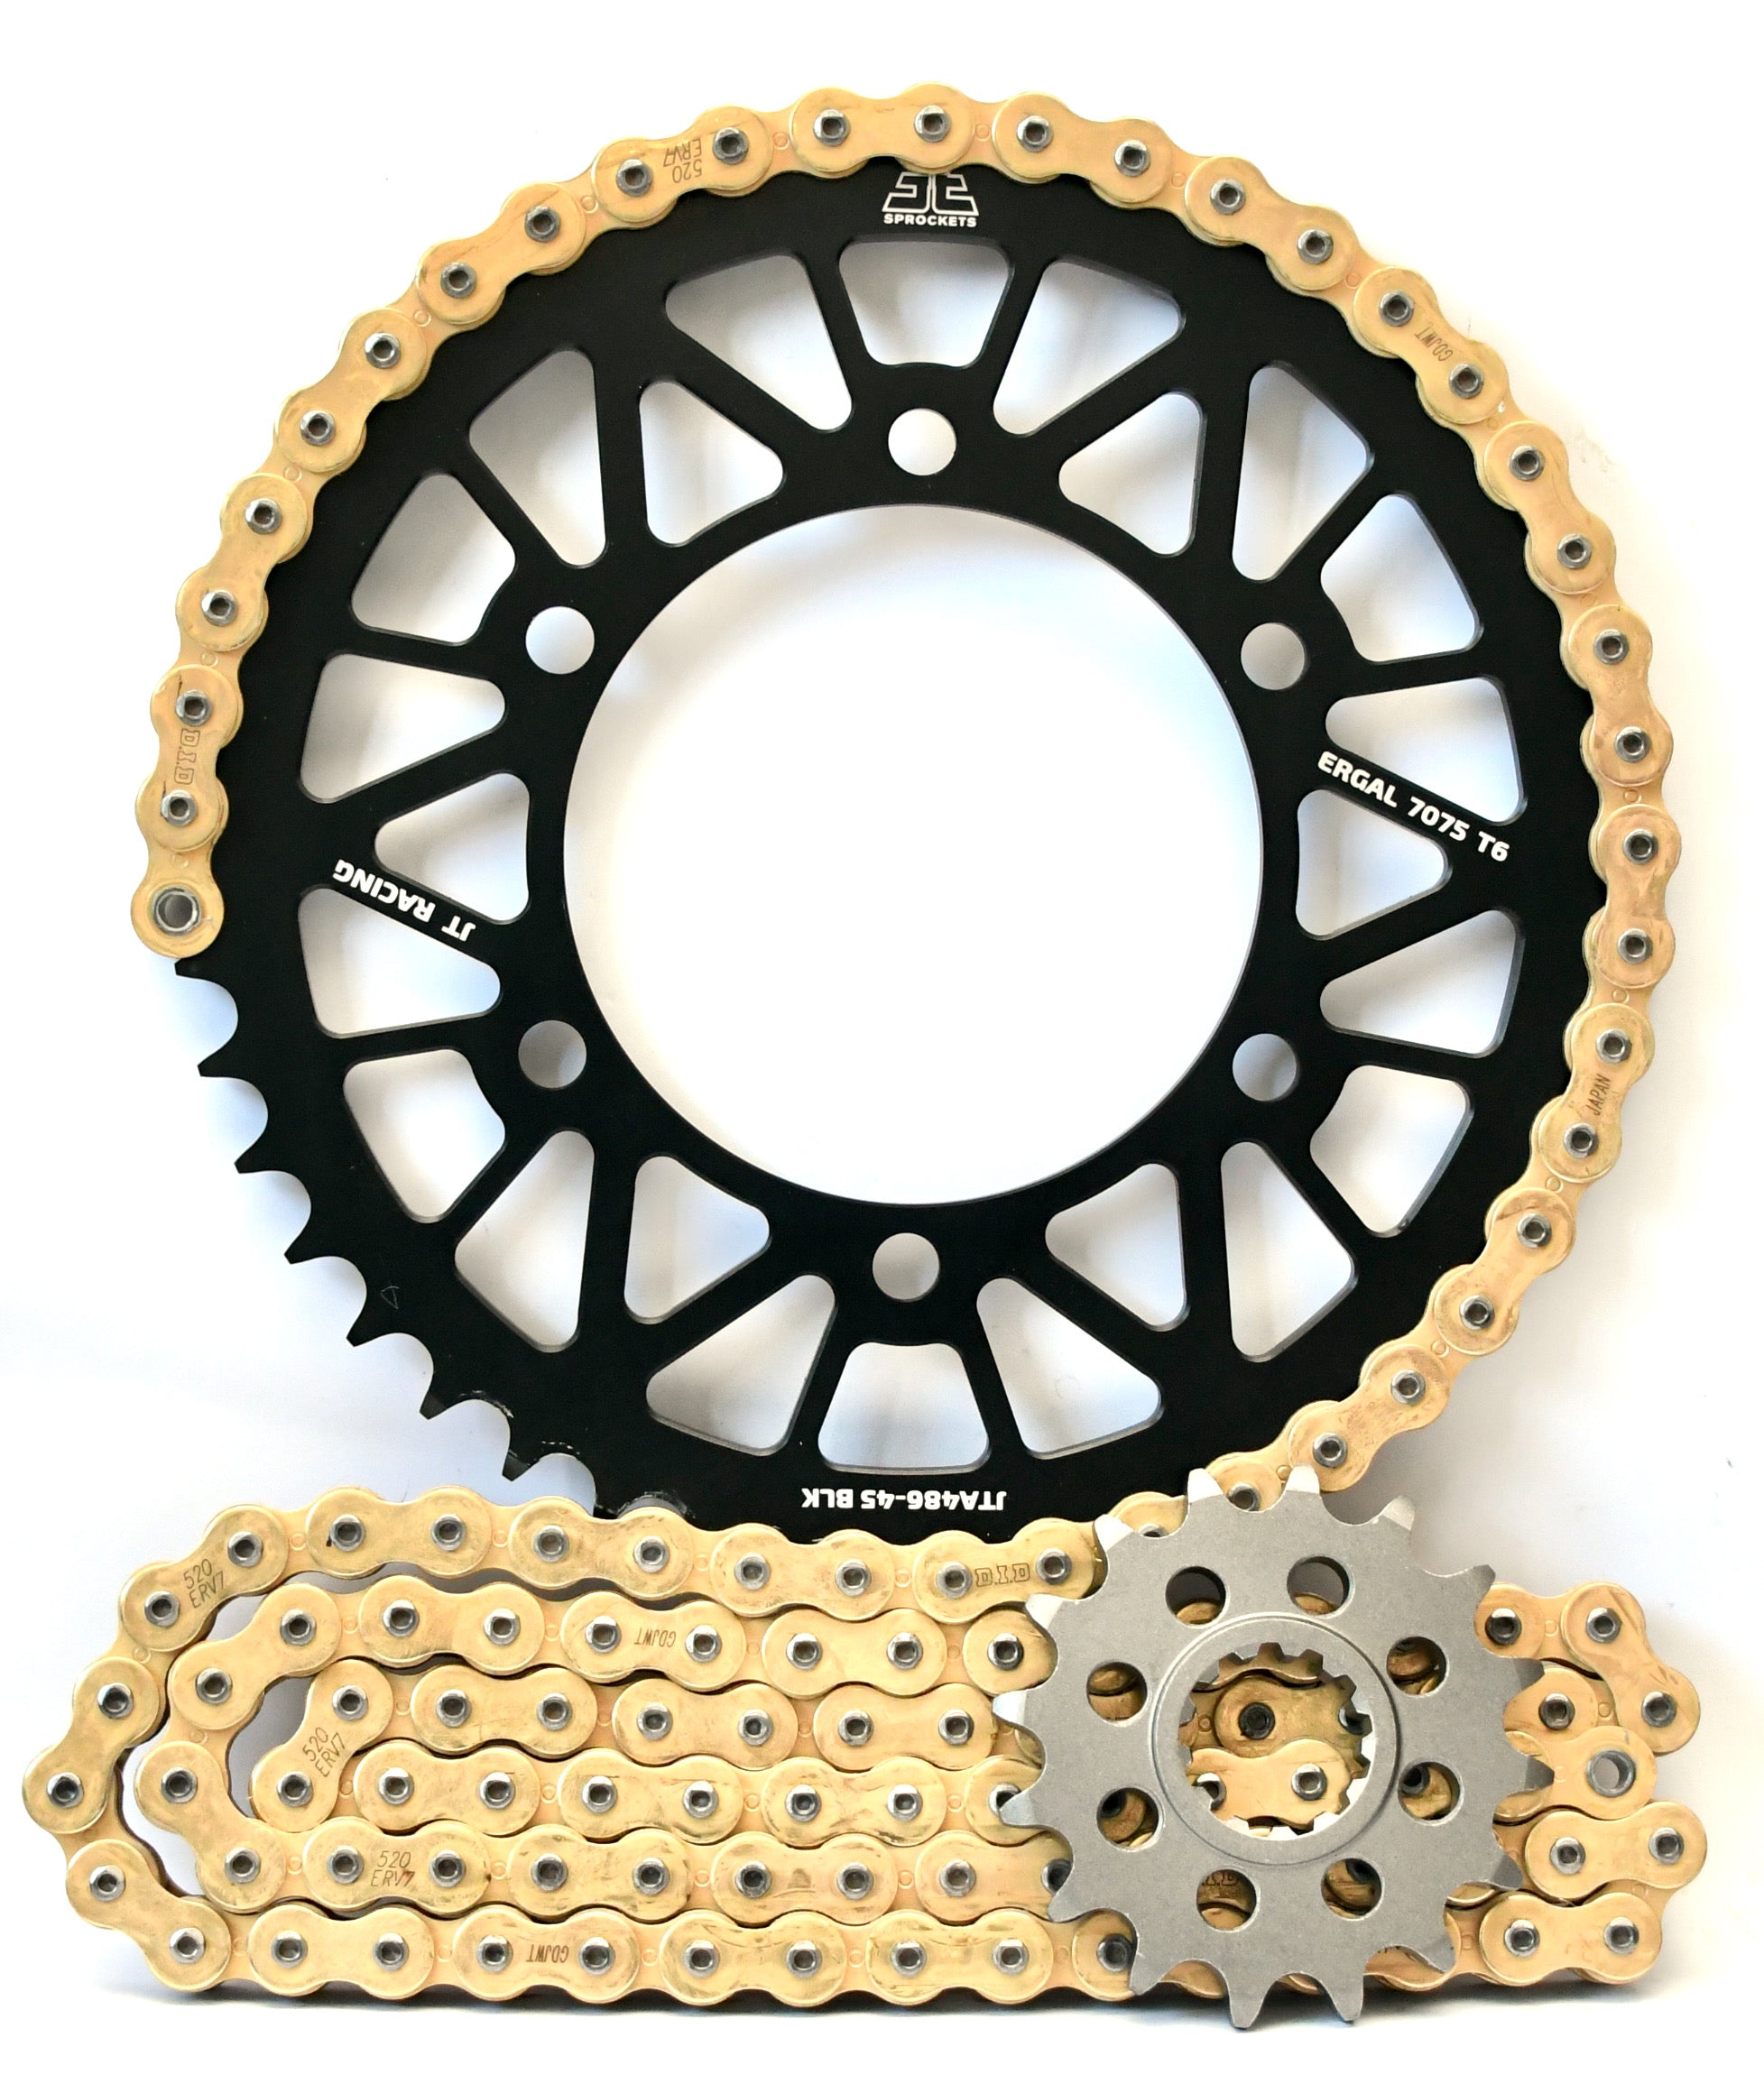 JT Racelite and DID 520 Conversion Chain & Sprocket Kit for Yamaha R1 - Choose Your Gearing